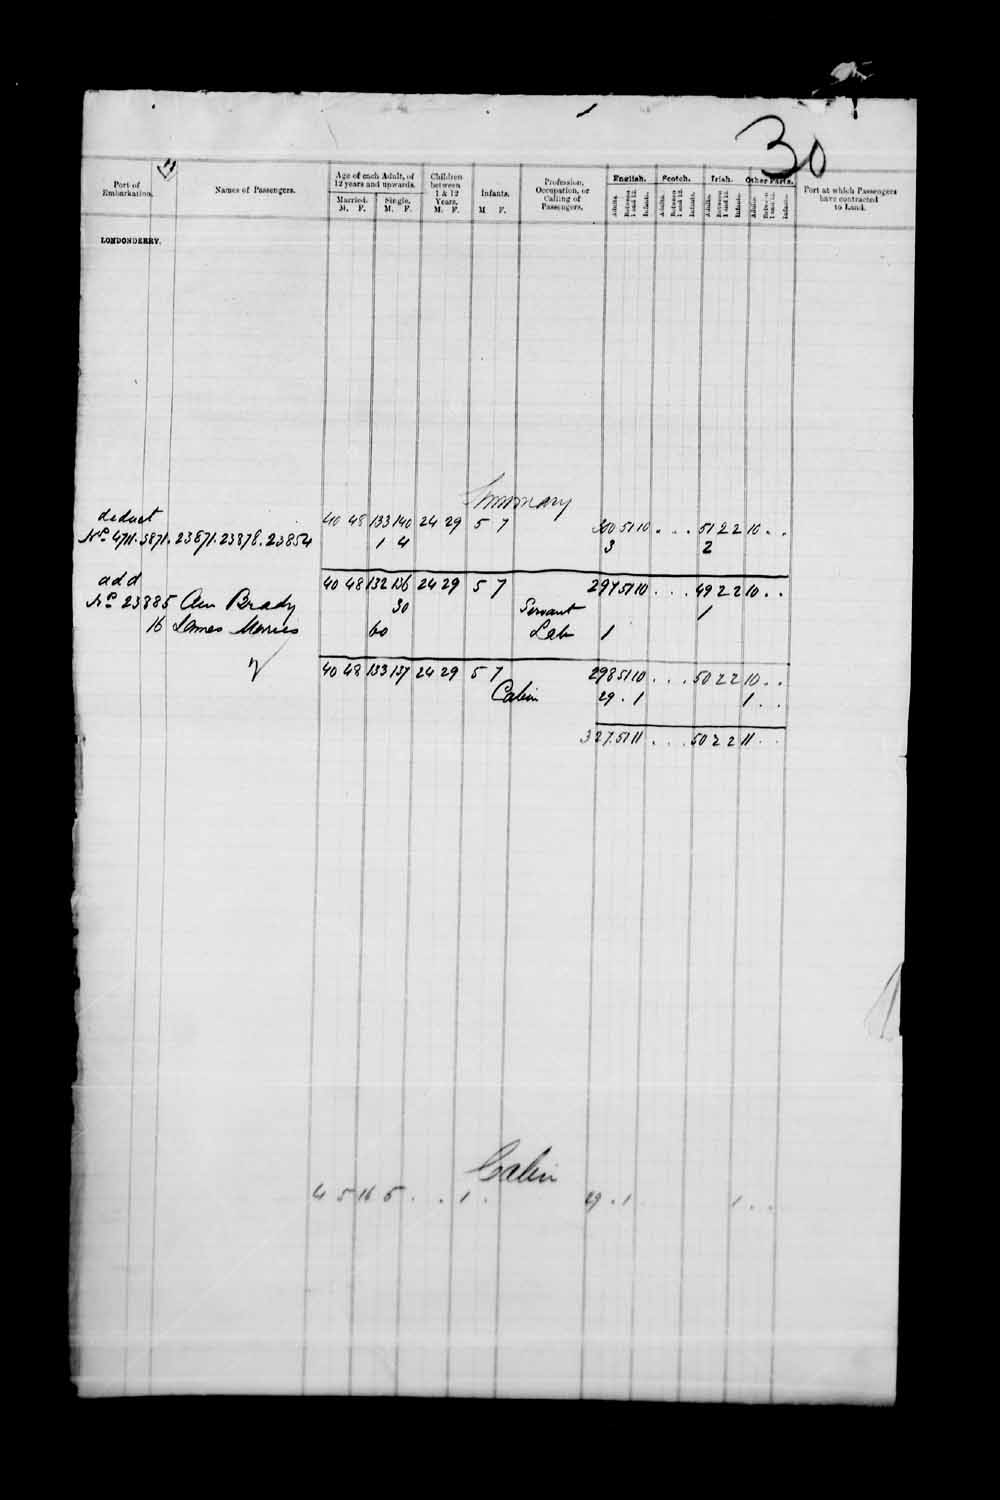 Digitized page of Passenger Lists for Image No.: e003530469